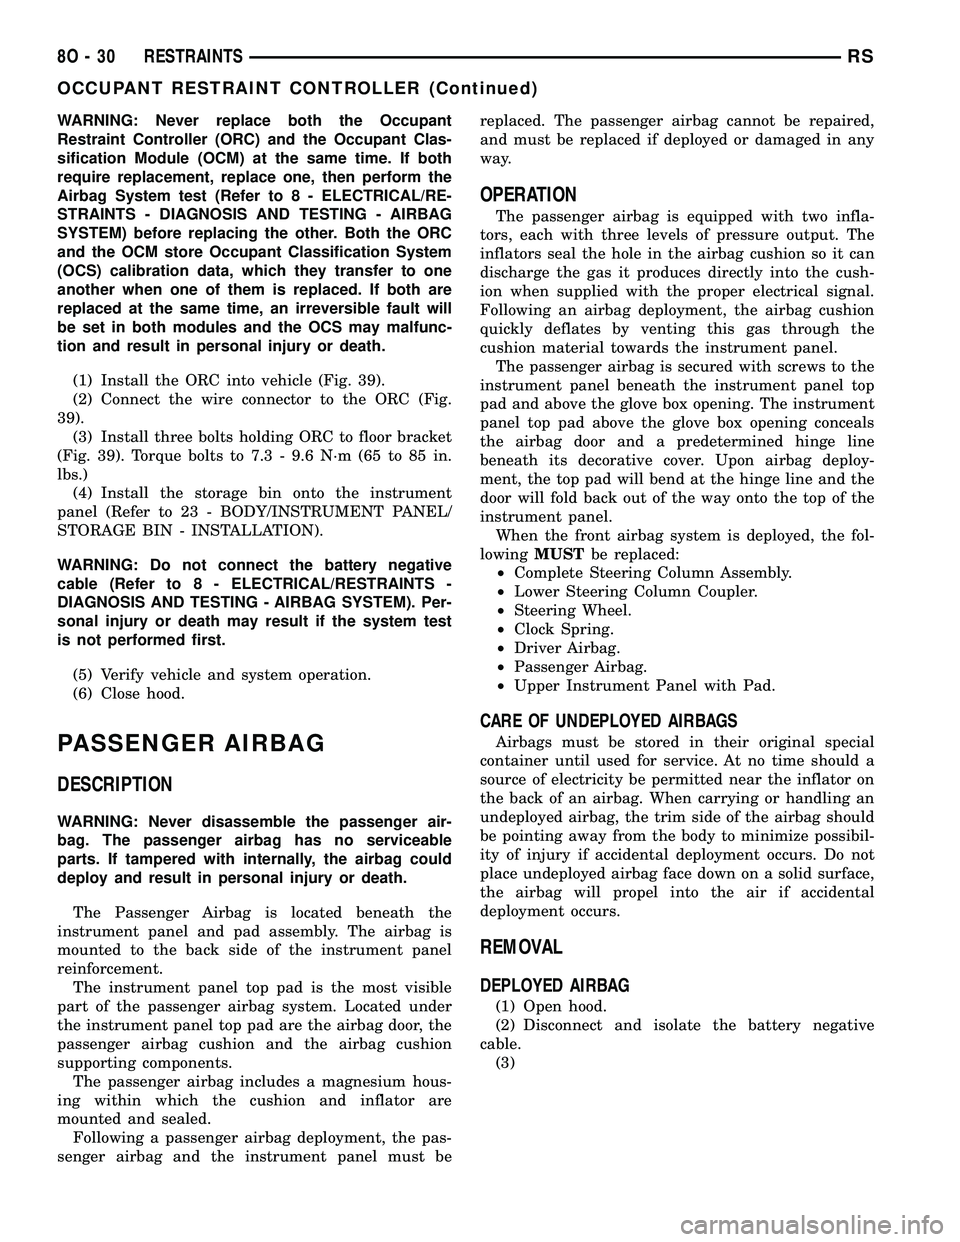 CHRYSLER VOYAGER 2005  Service Manual WARNING: Never replace both the Occupant
Restraint Controller (ORC) and the Occupant Clas-
sification Module (OCM) at the same time. If both
require replacement, replace one, then perform the
Airbag S